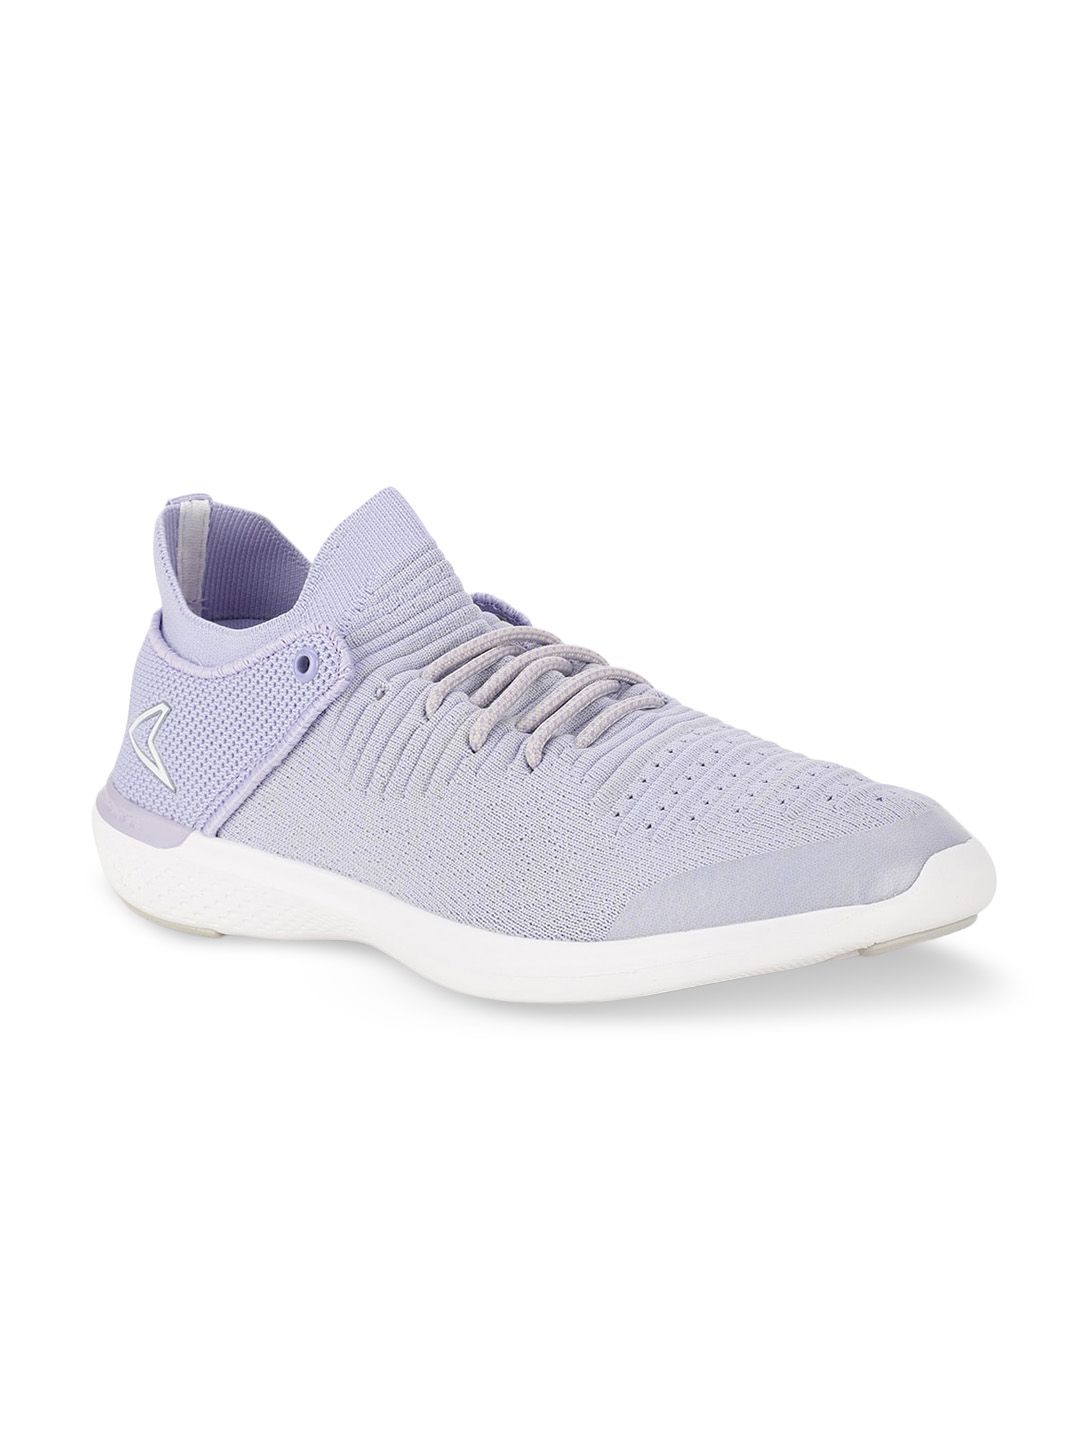 Power Women Blue Woven Design Sneakers Price in India